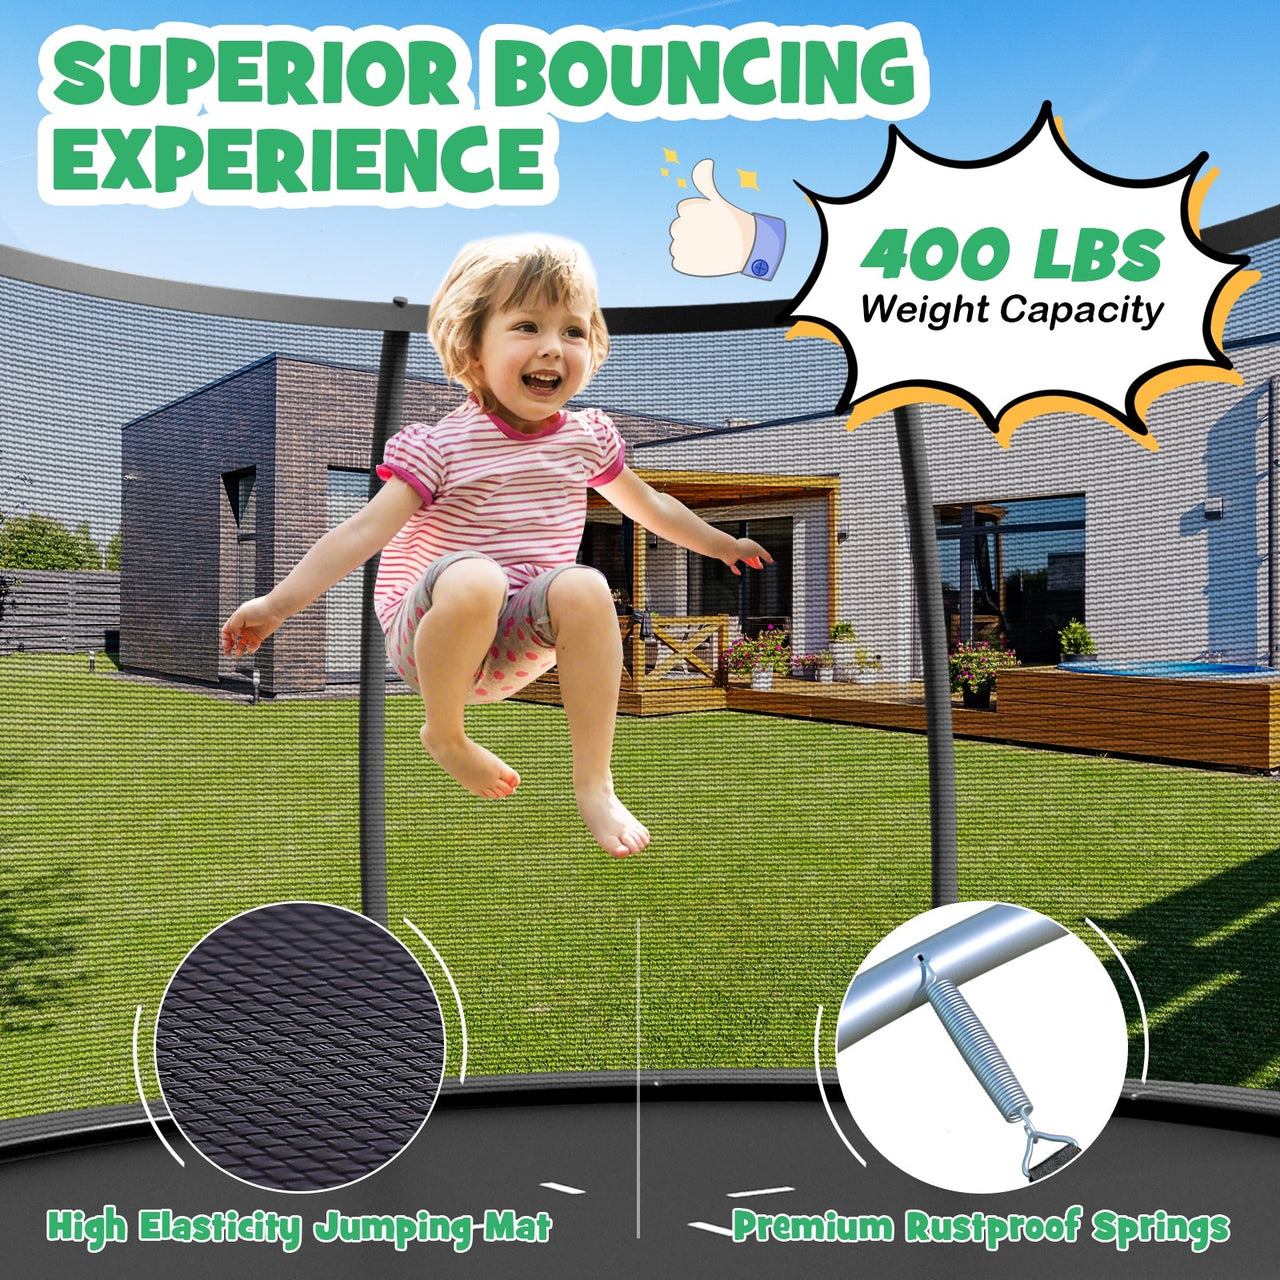 8 Feet ASTM Approved Recreational Trampoline with Ladder